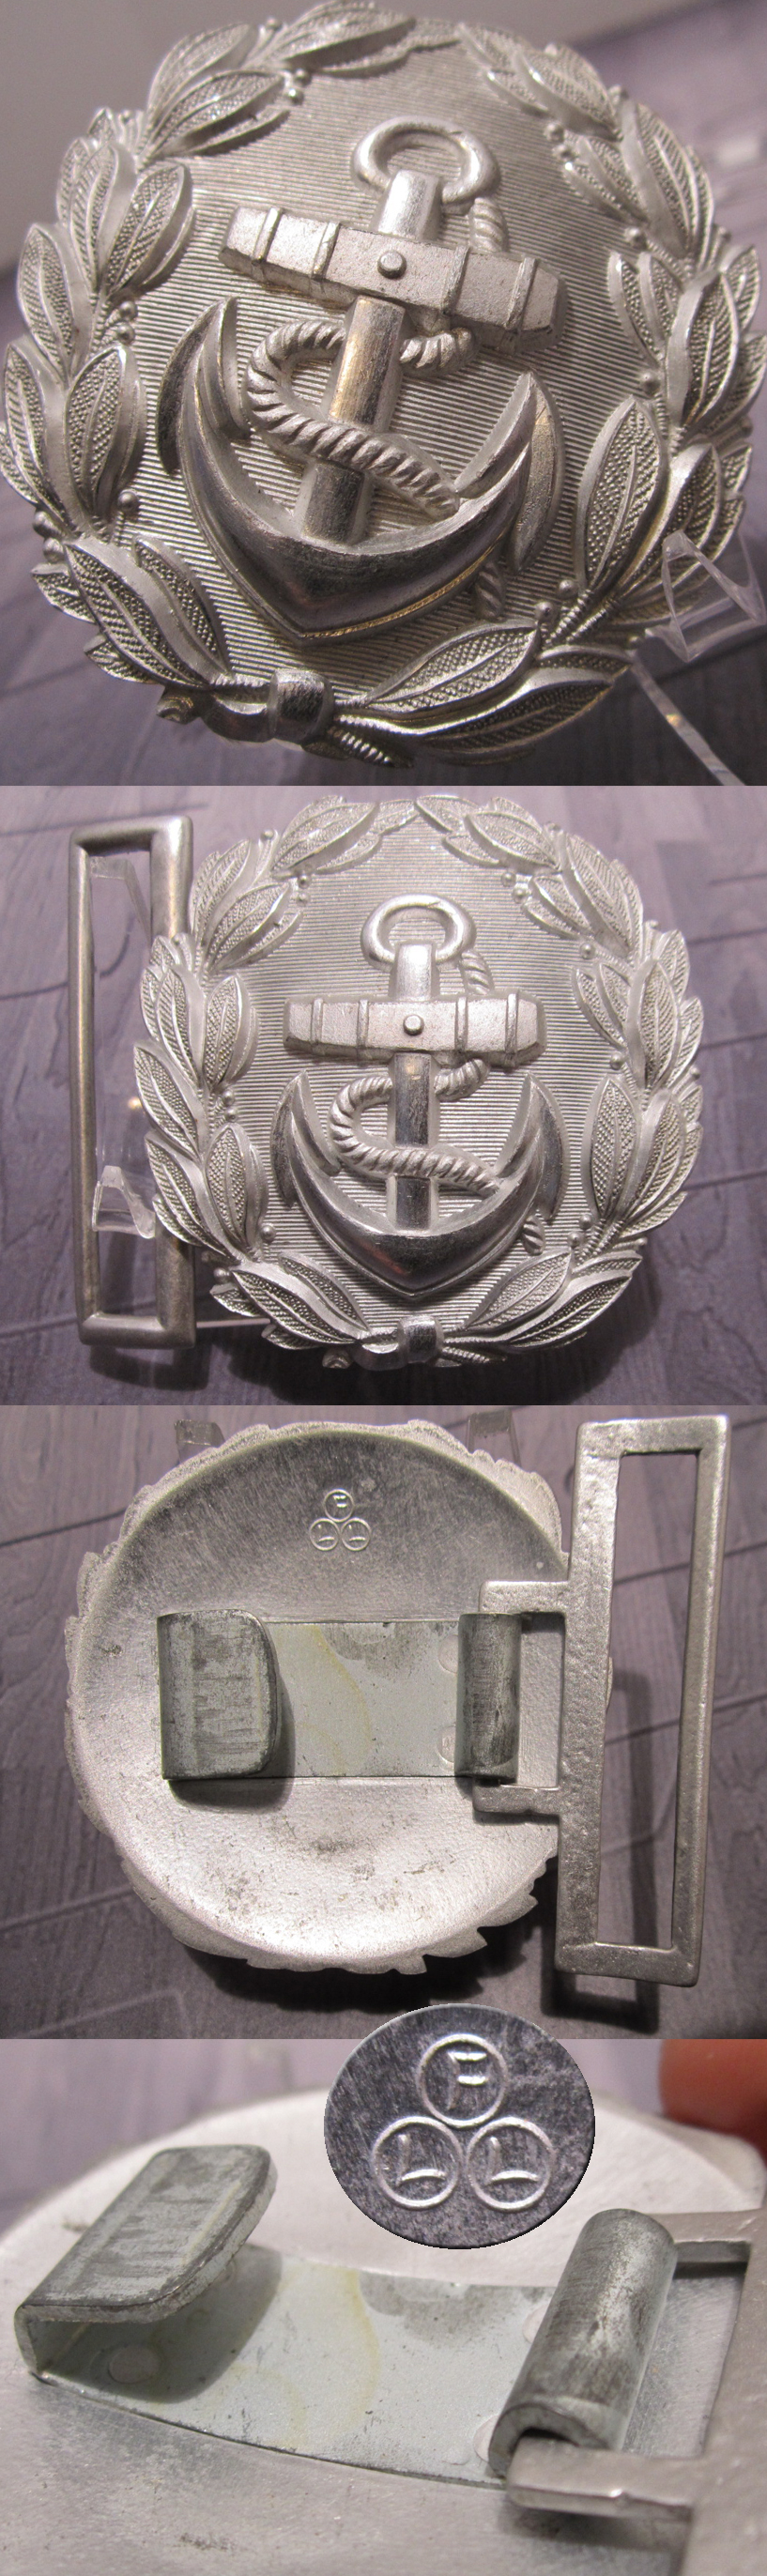 Navy Administrative Officers Belt Buckle by FLL